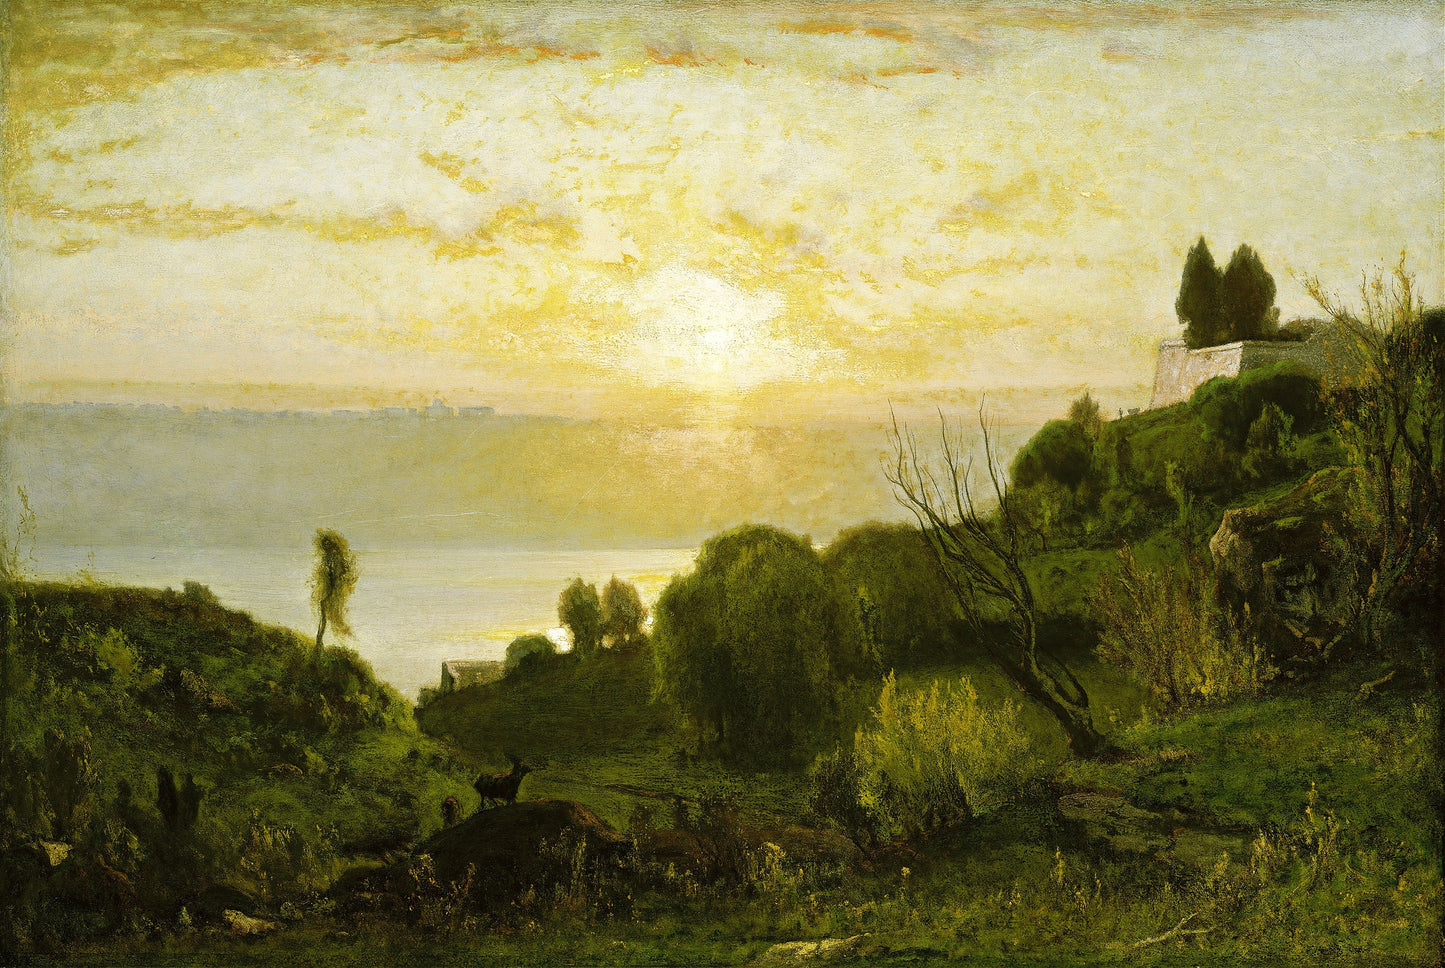 George Inness Landscape Paintings Set 2 [32 Images]